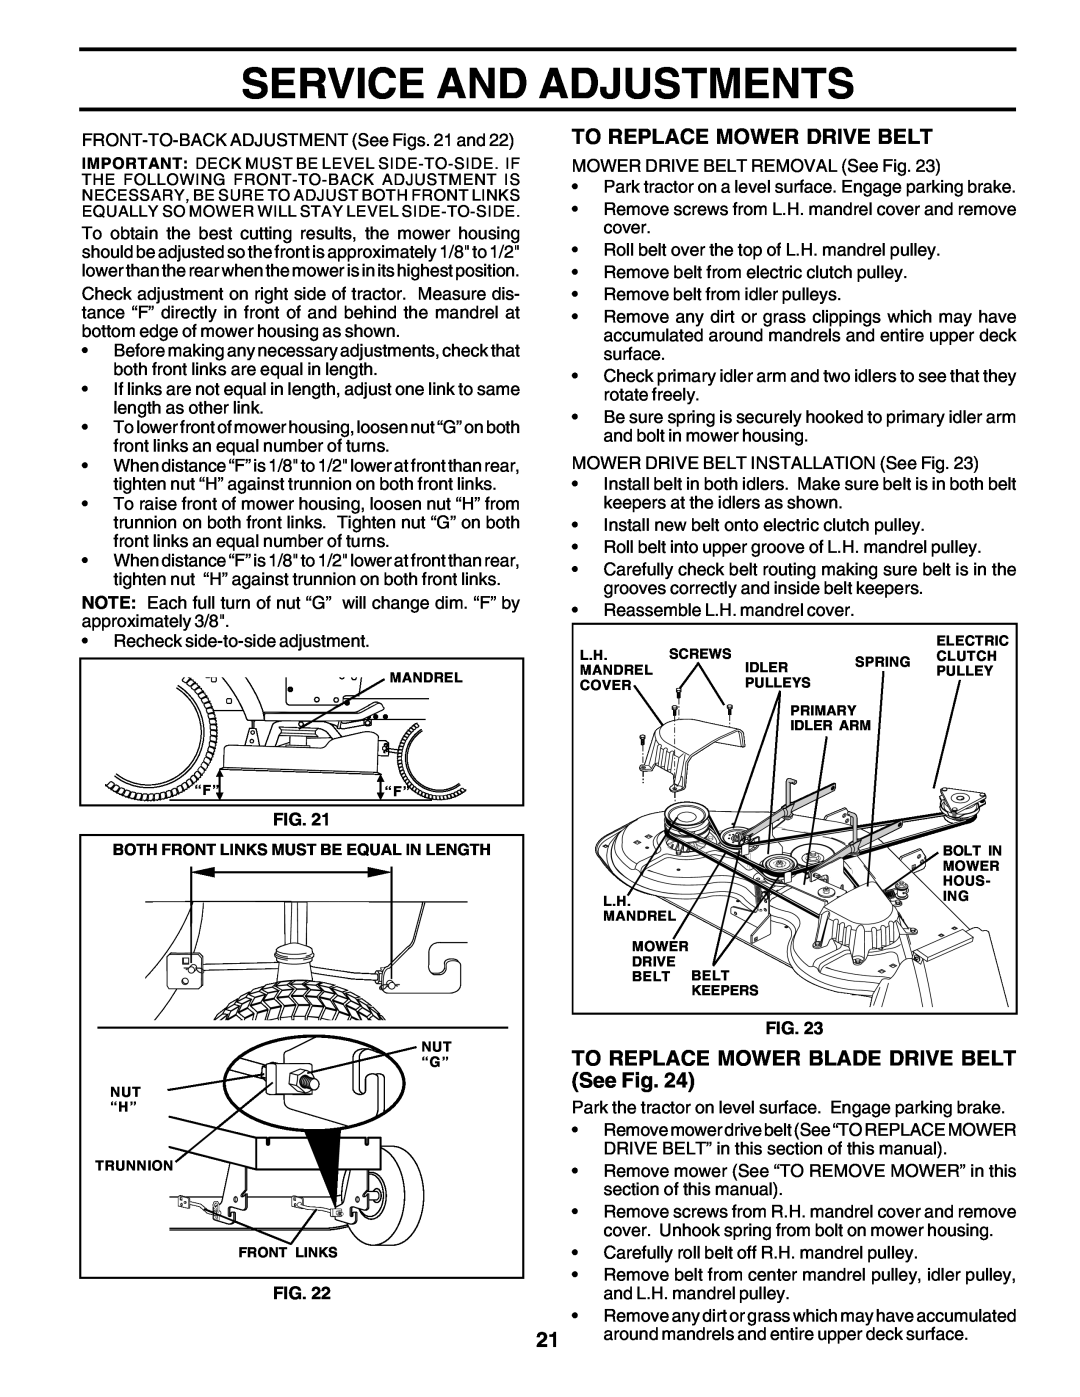 Poulan 176873 owner manual Service And Adjustments, To Replace Mower Drive Belt, TO REPLACE MOWER BLADE DRIVE BELT See Fig 